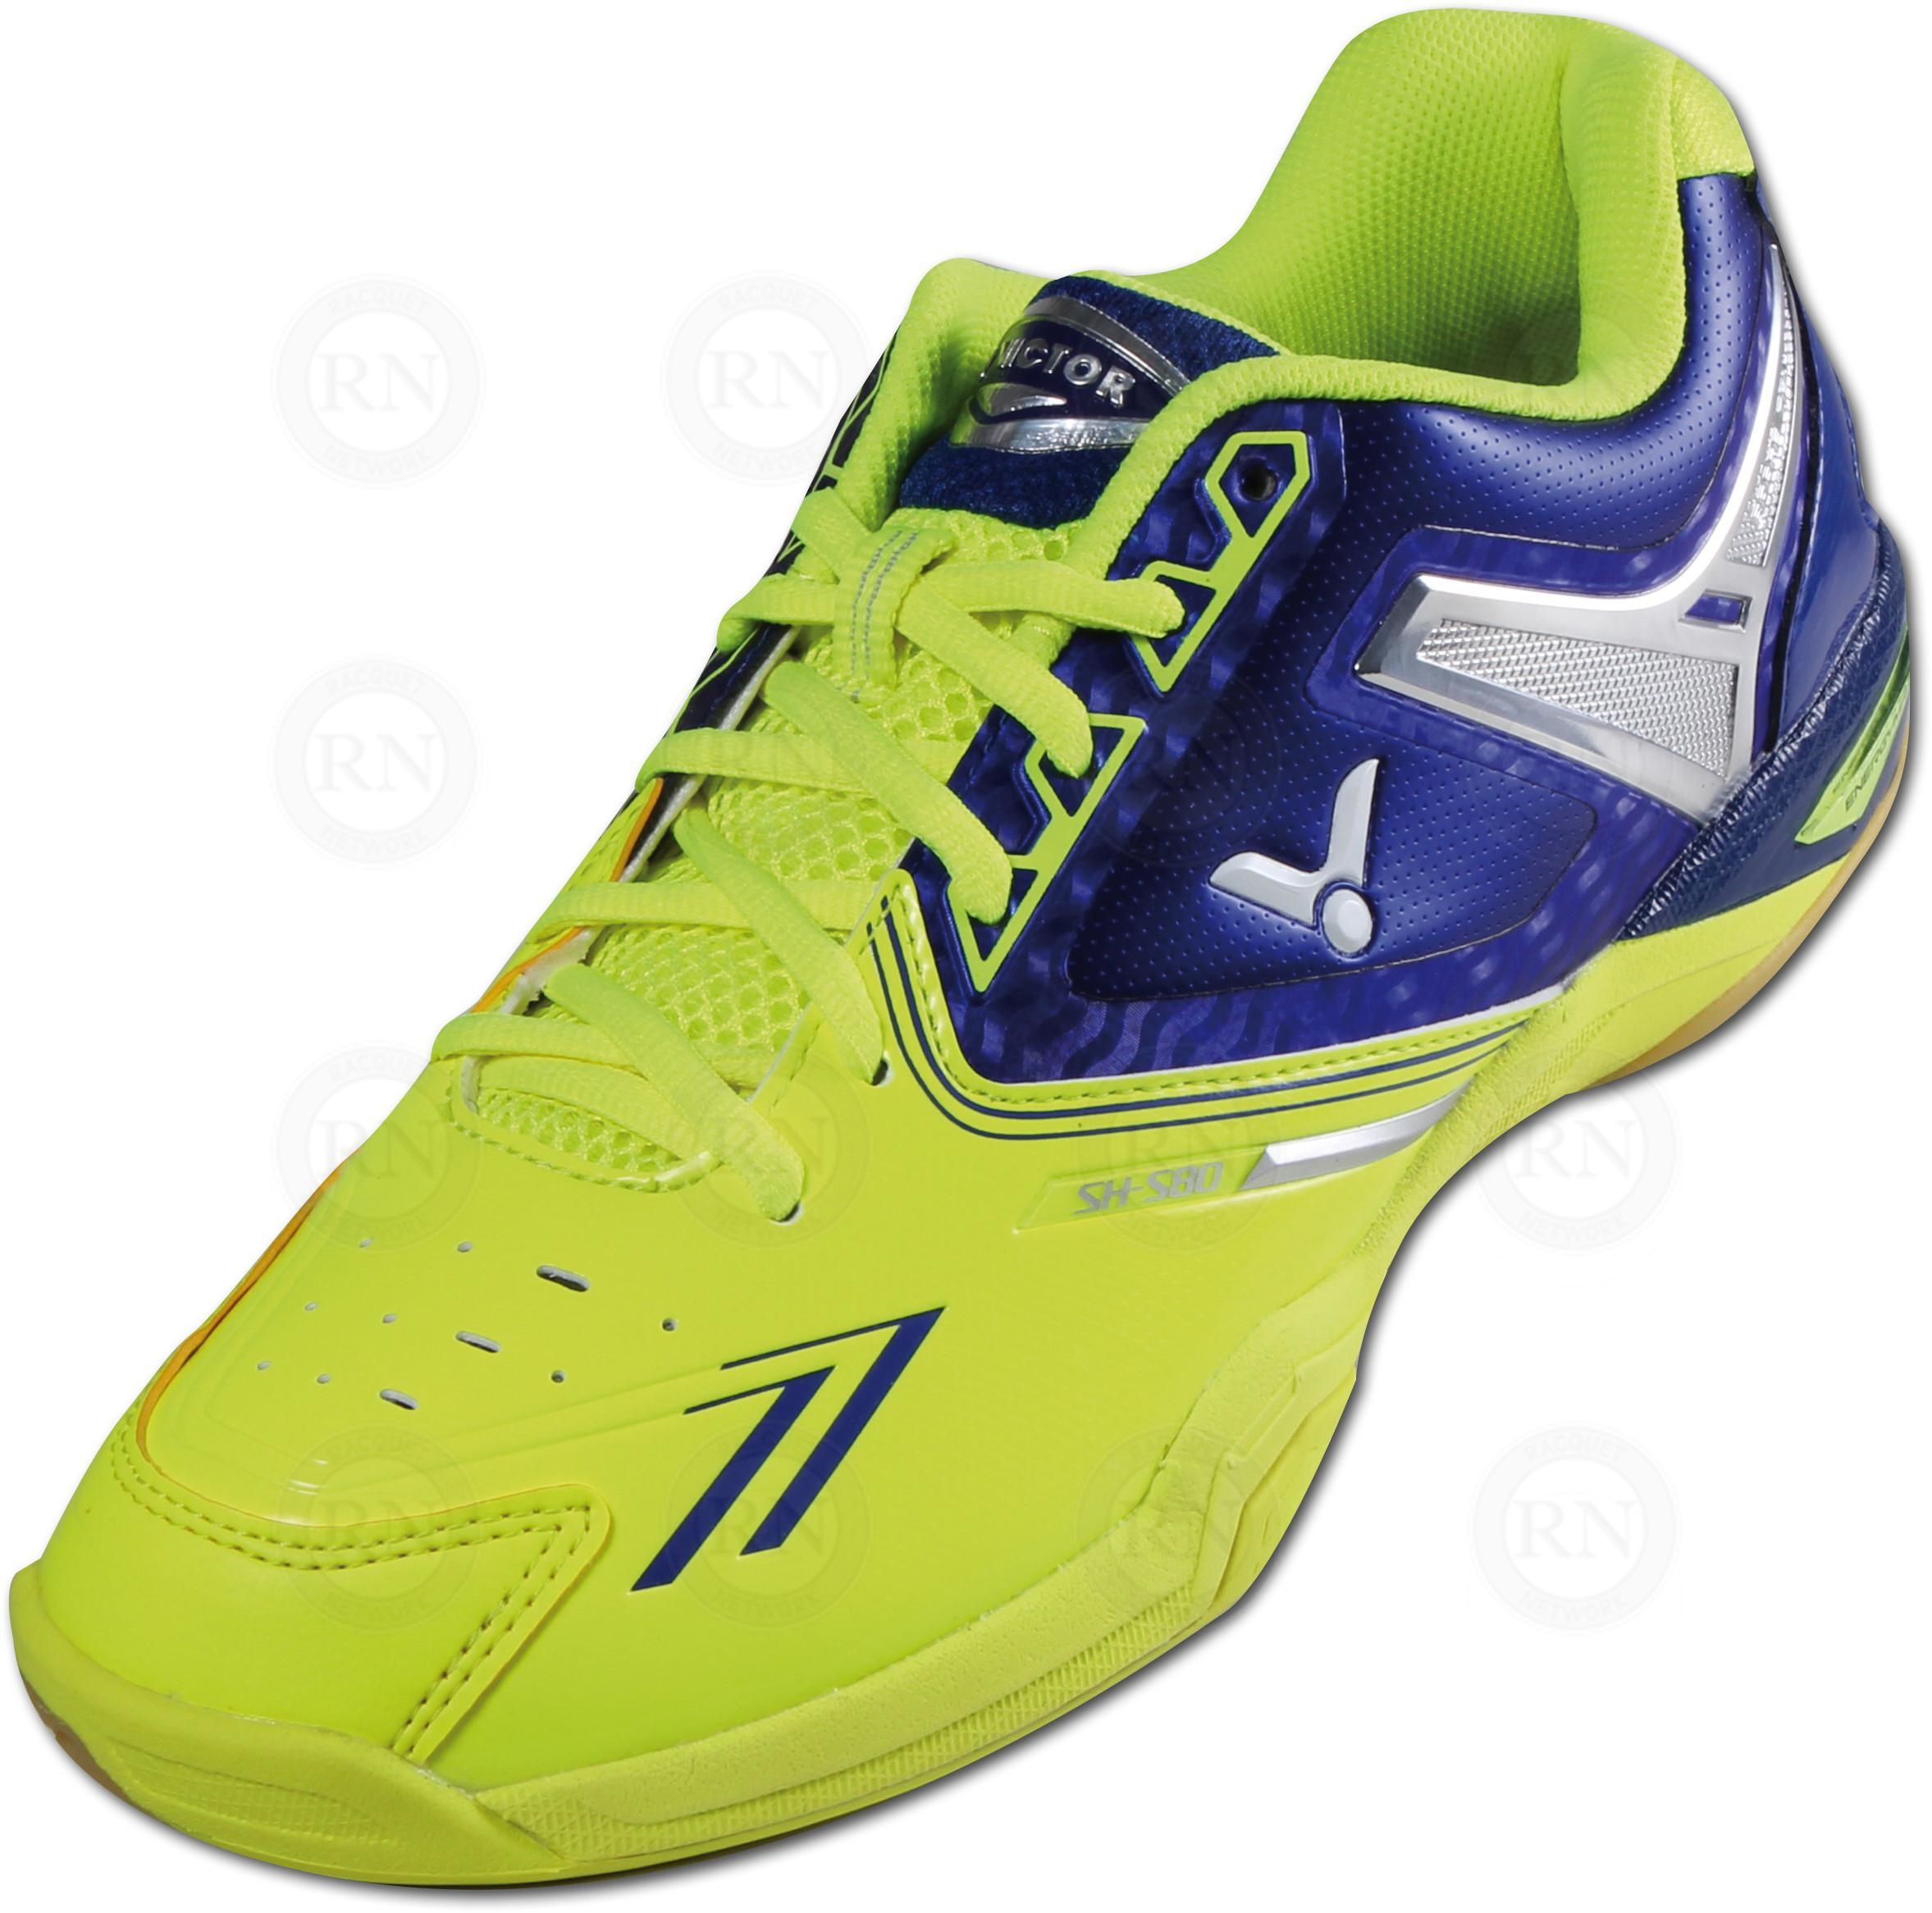 Victor SH 80 JR Badminton Shoes Calgary Canada Store and Online